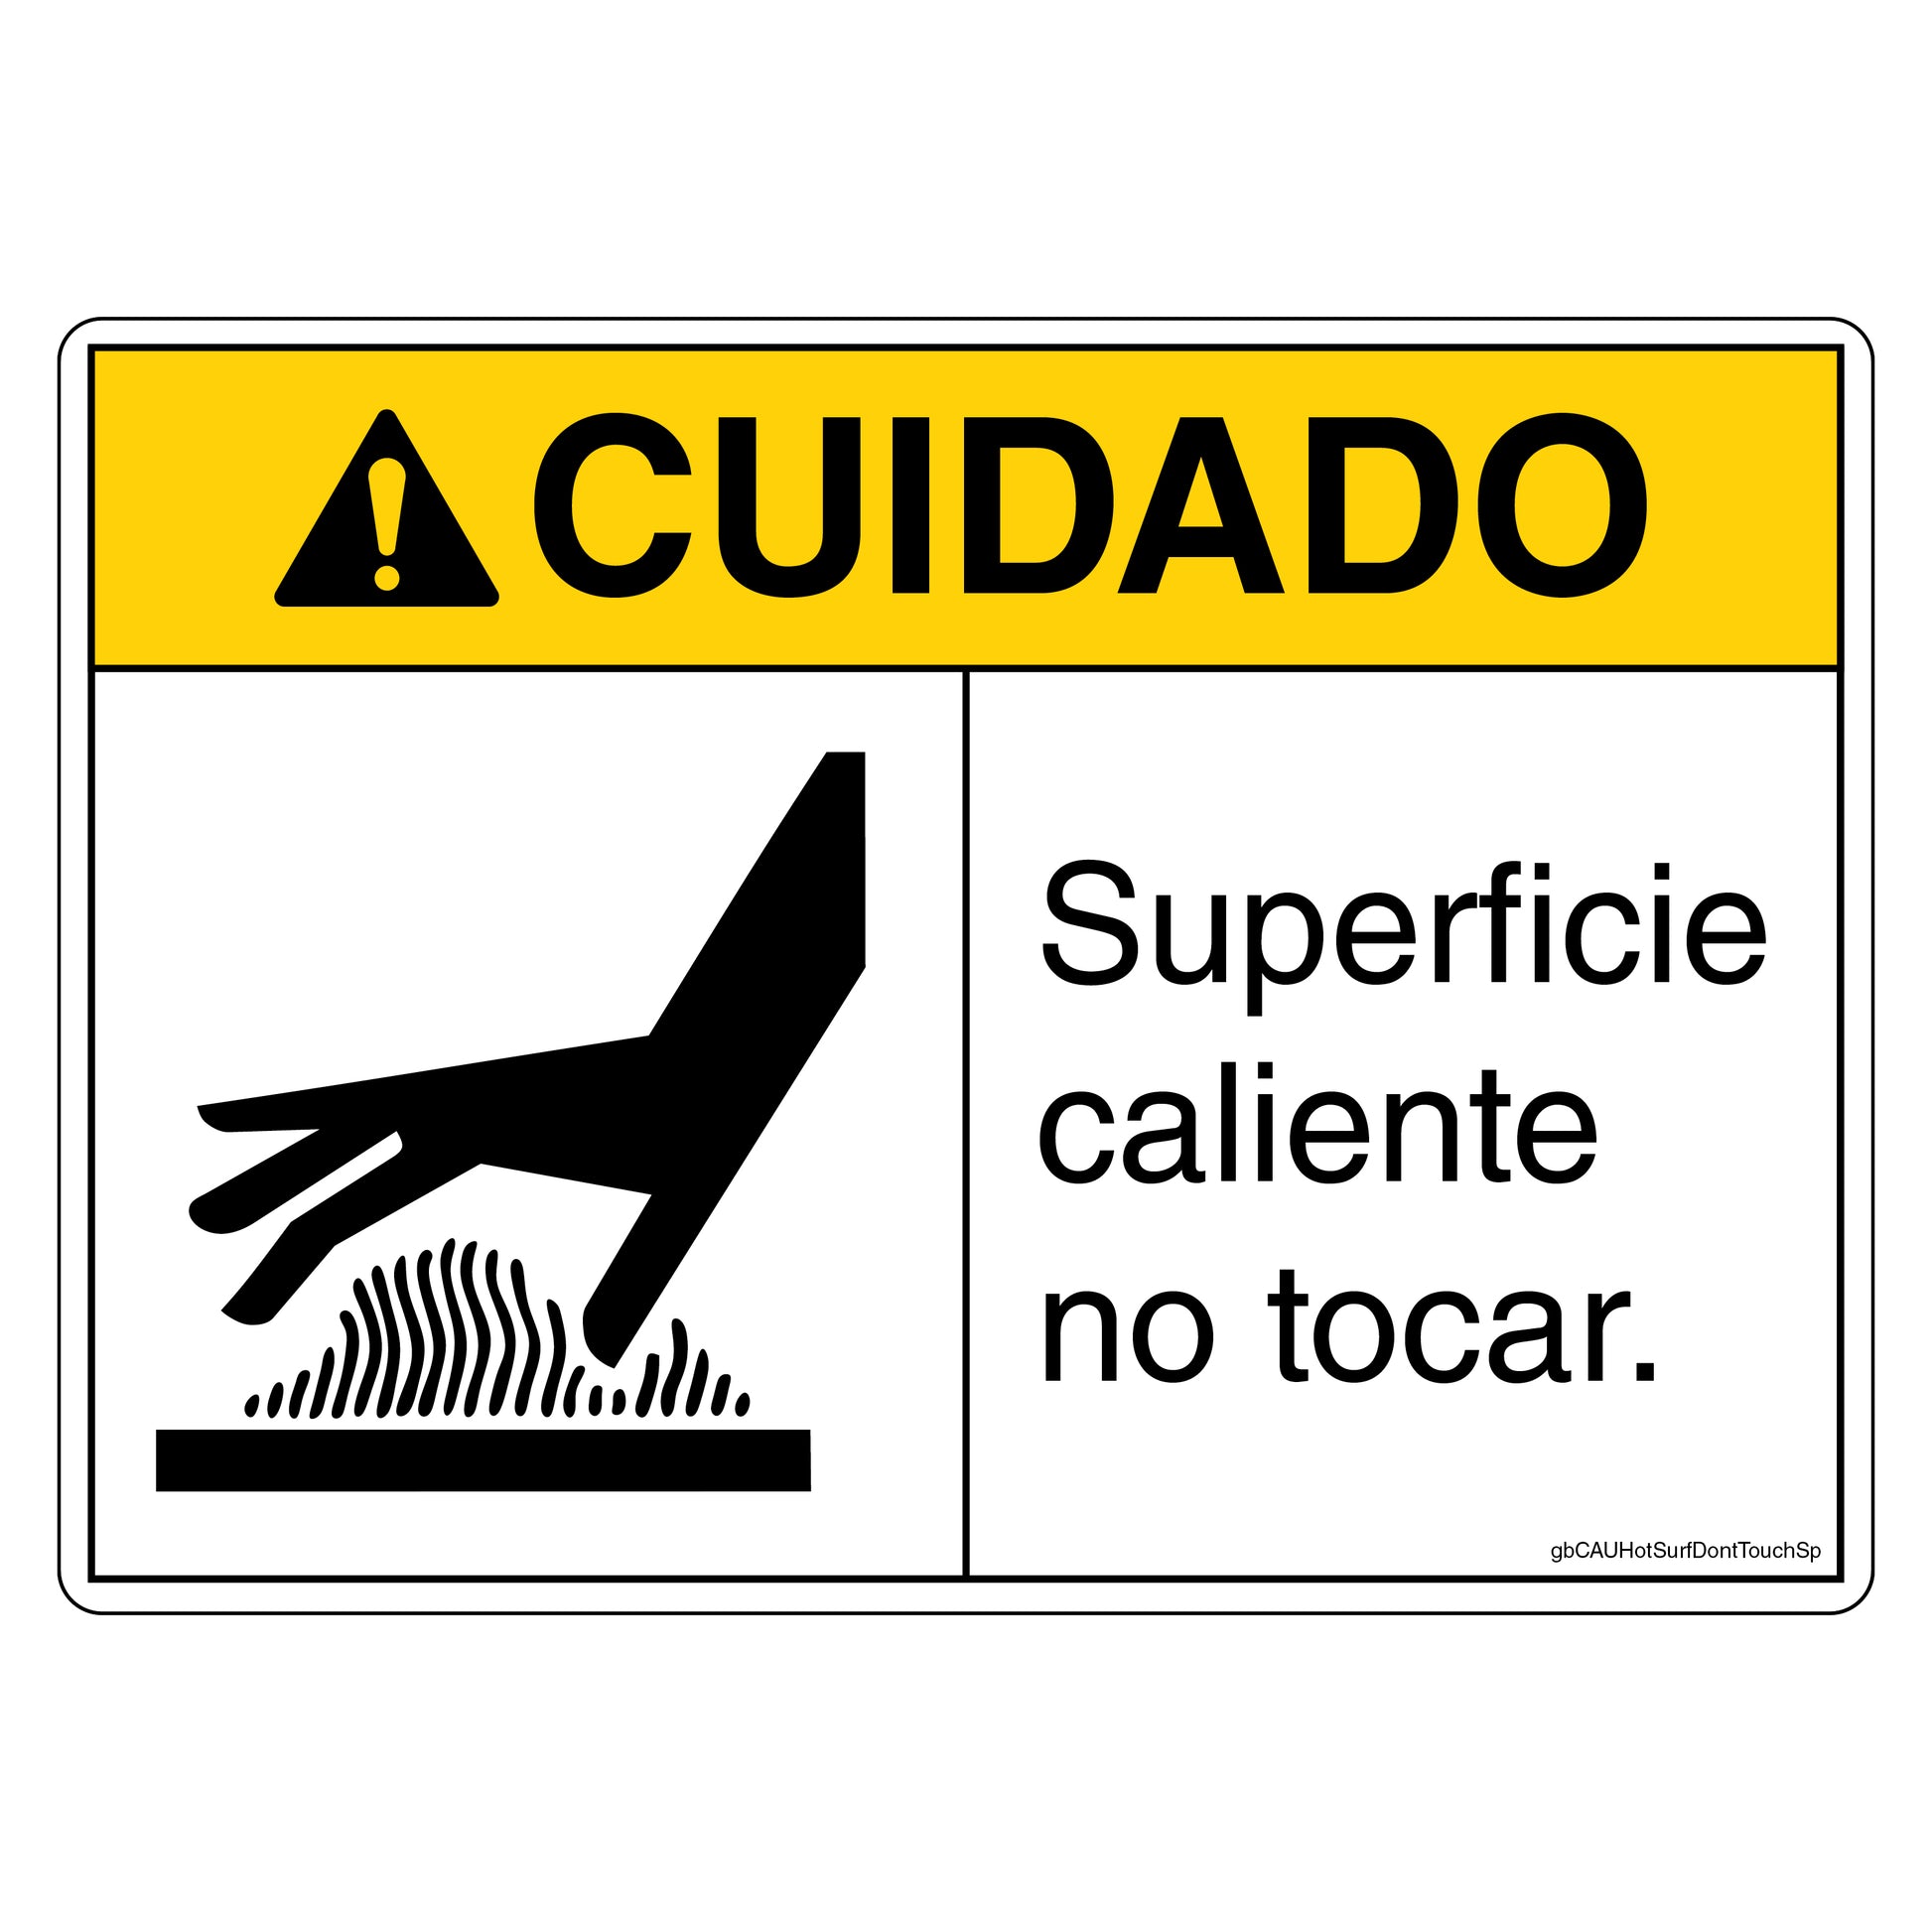 do not touch sign in spanish